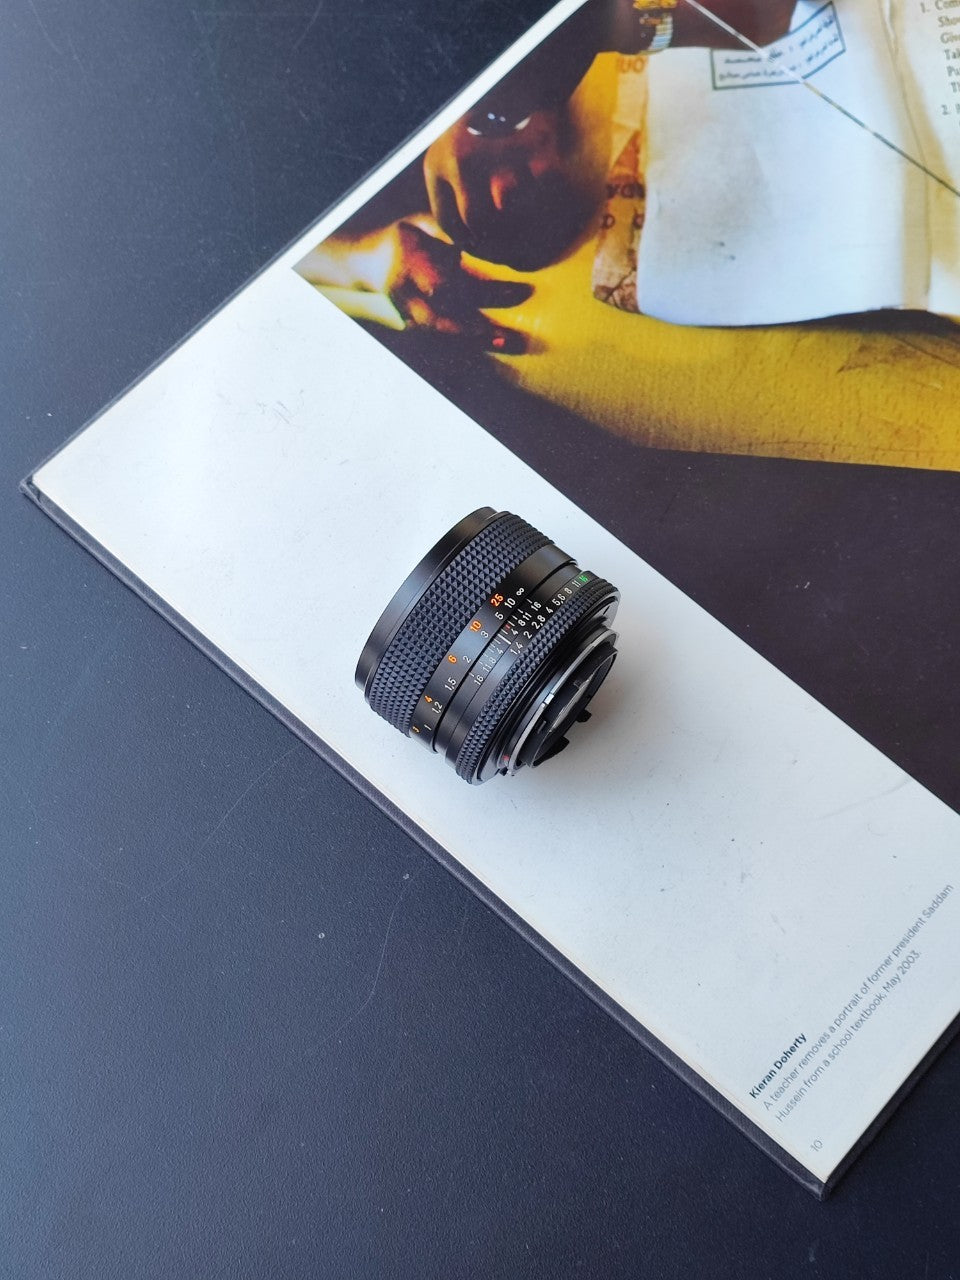 [Sold As-is] Contax Carl Zeiss Planar 50mm F1.4 T* MMJ